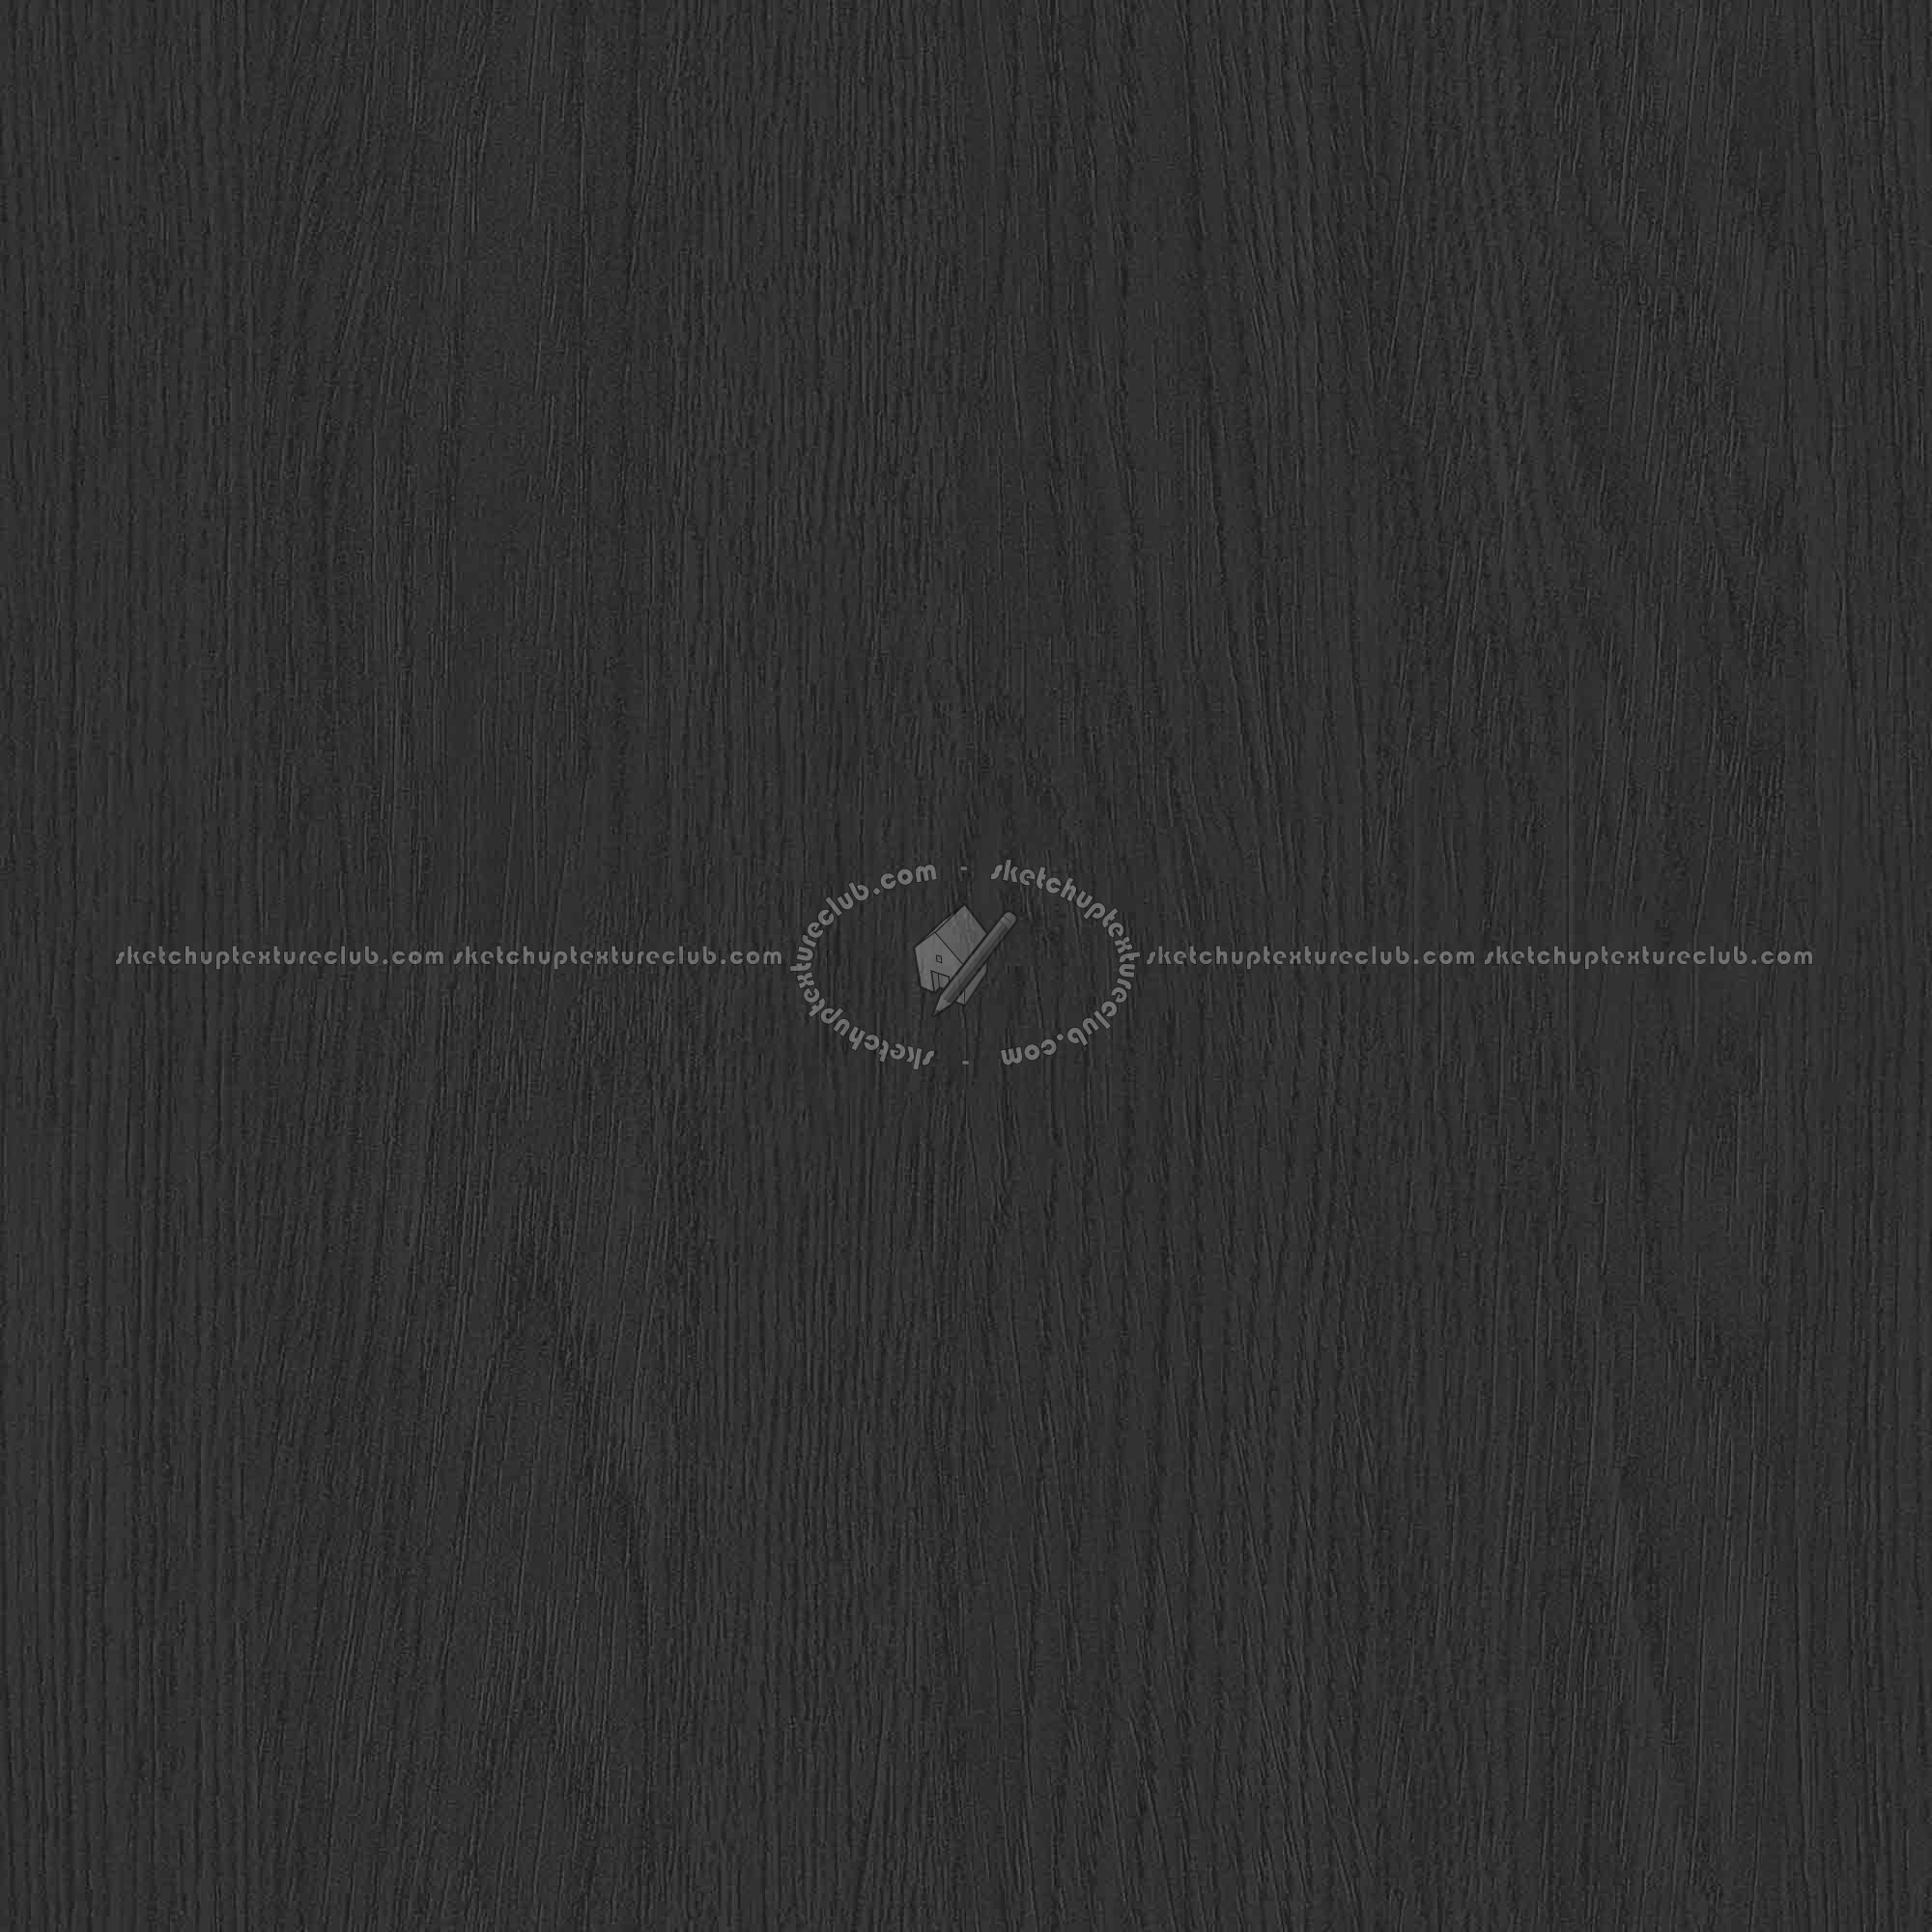 Green pine stained PBR wood texture seamless 21855